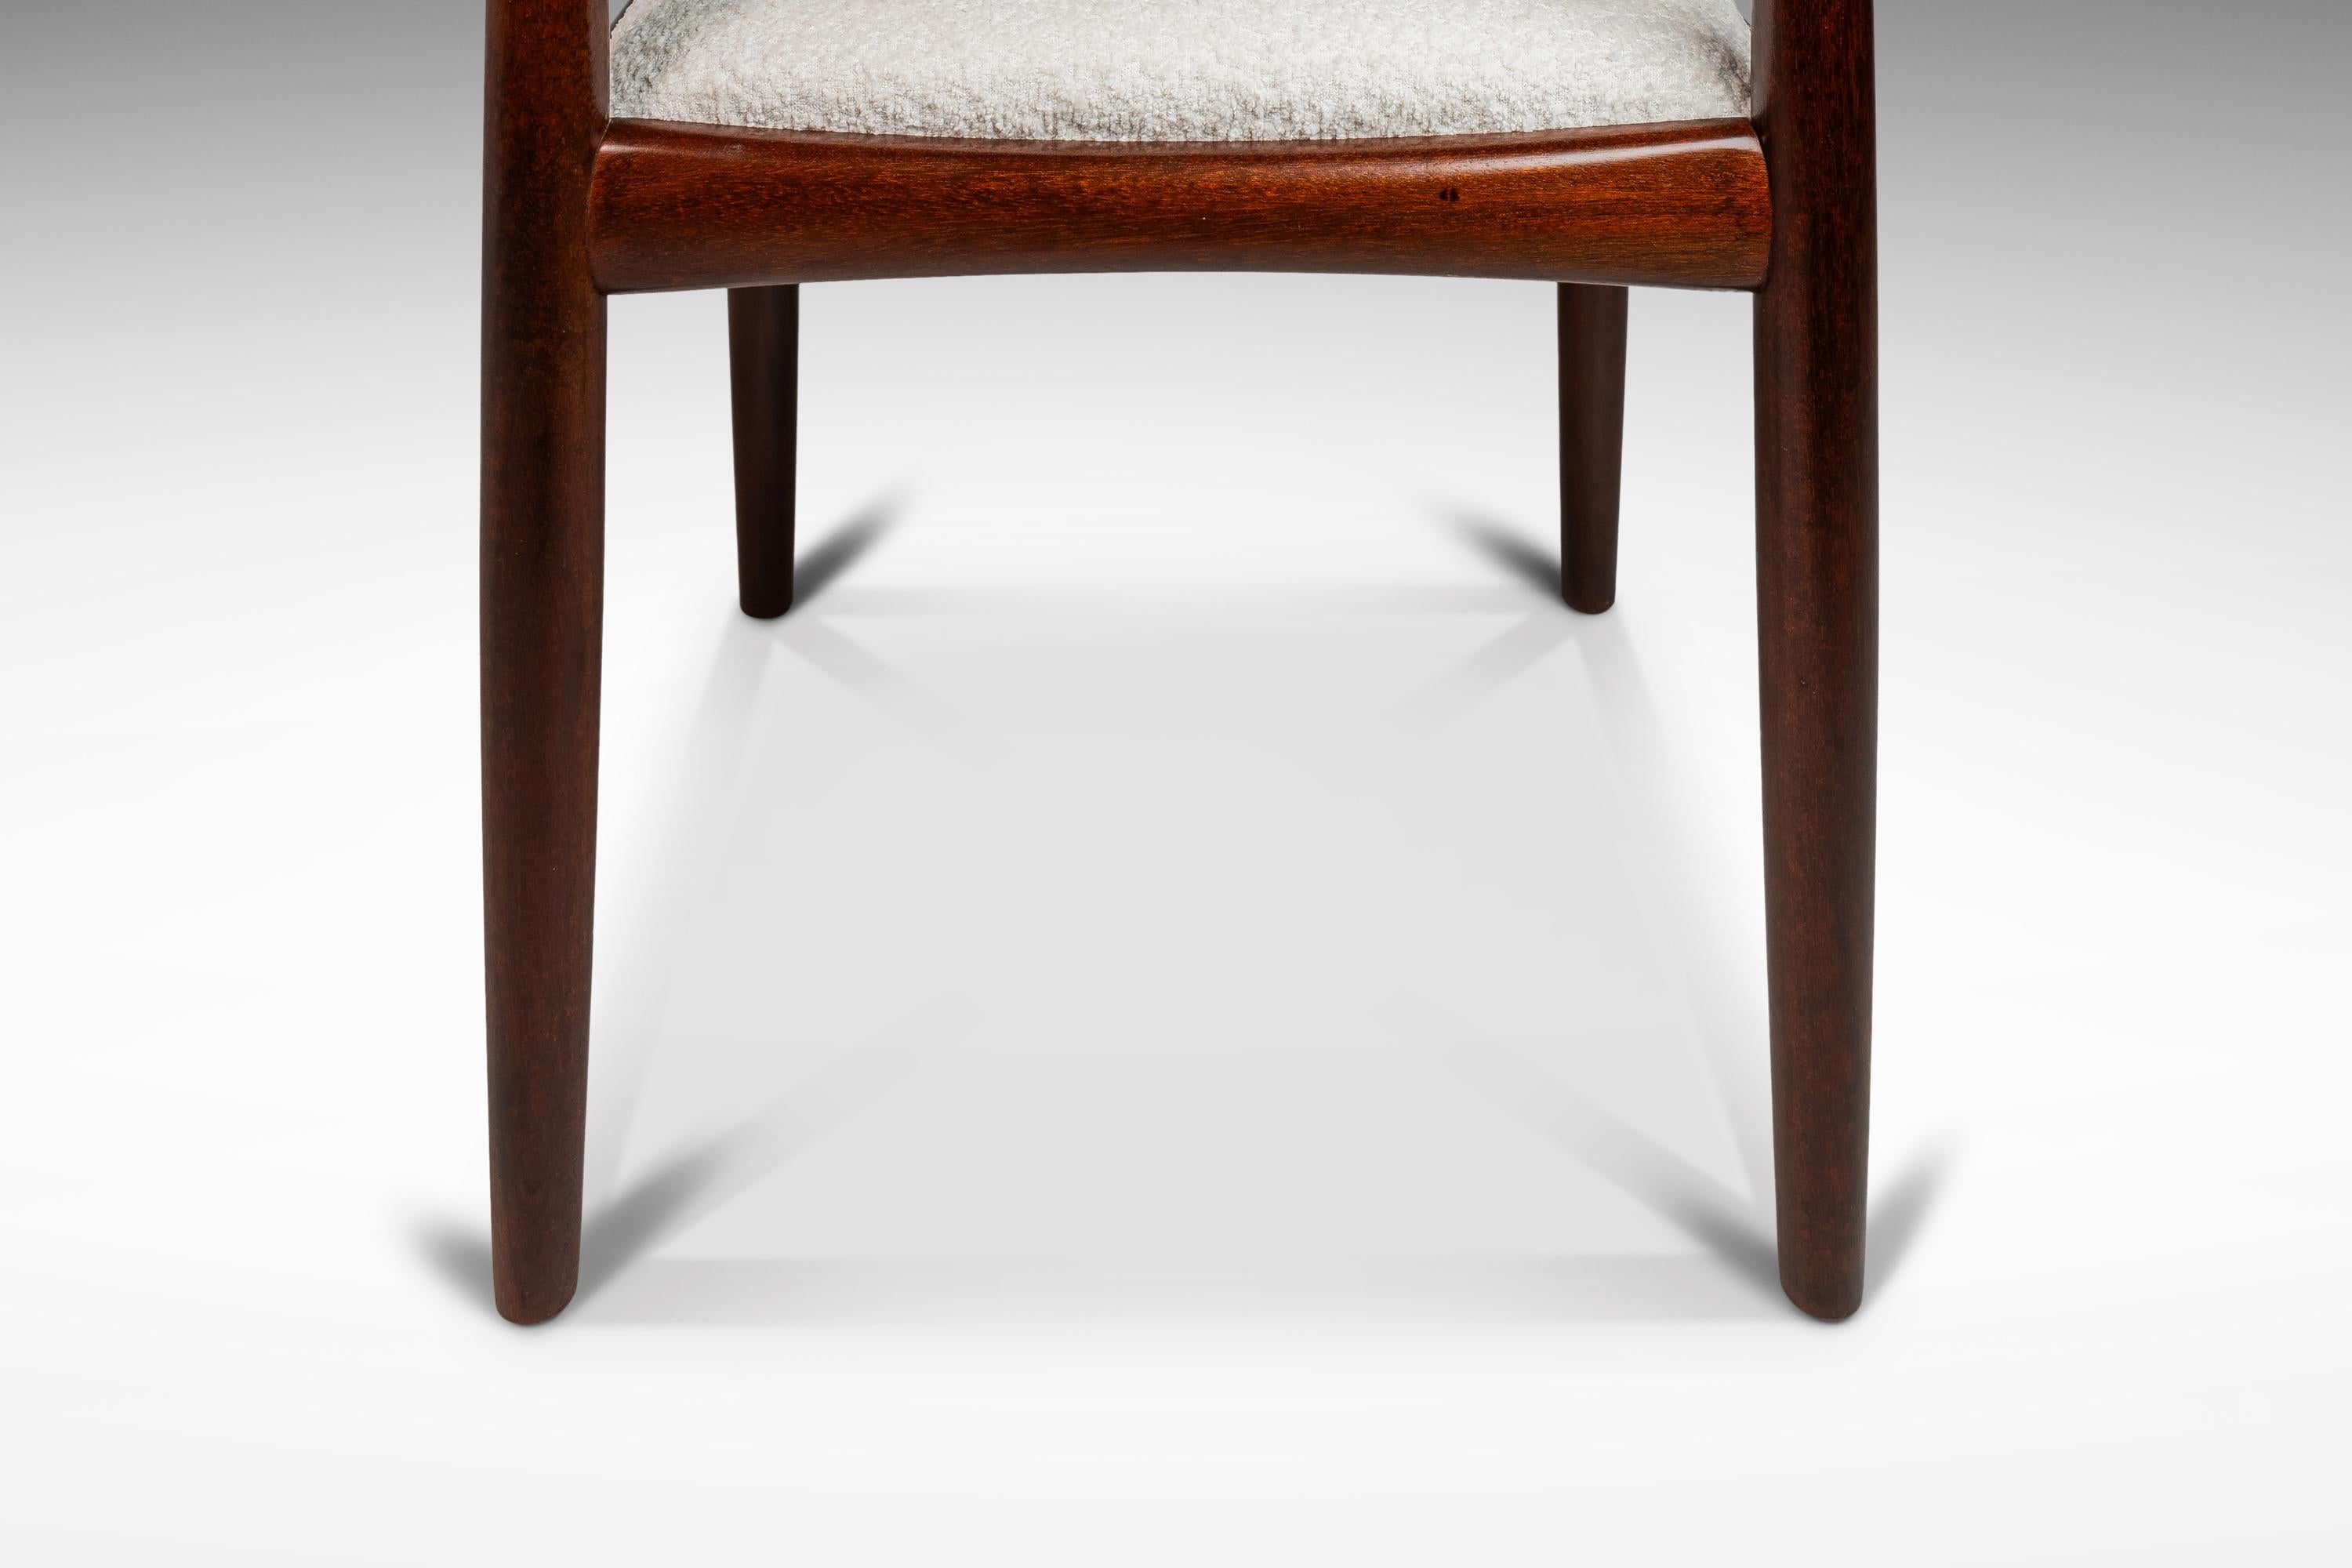 Set of 4 Model 382 Dining Chairs in Mahogany by H.W. Klein, Denmark, c. 1960s For Sale 7